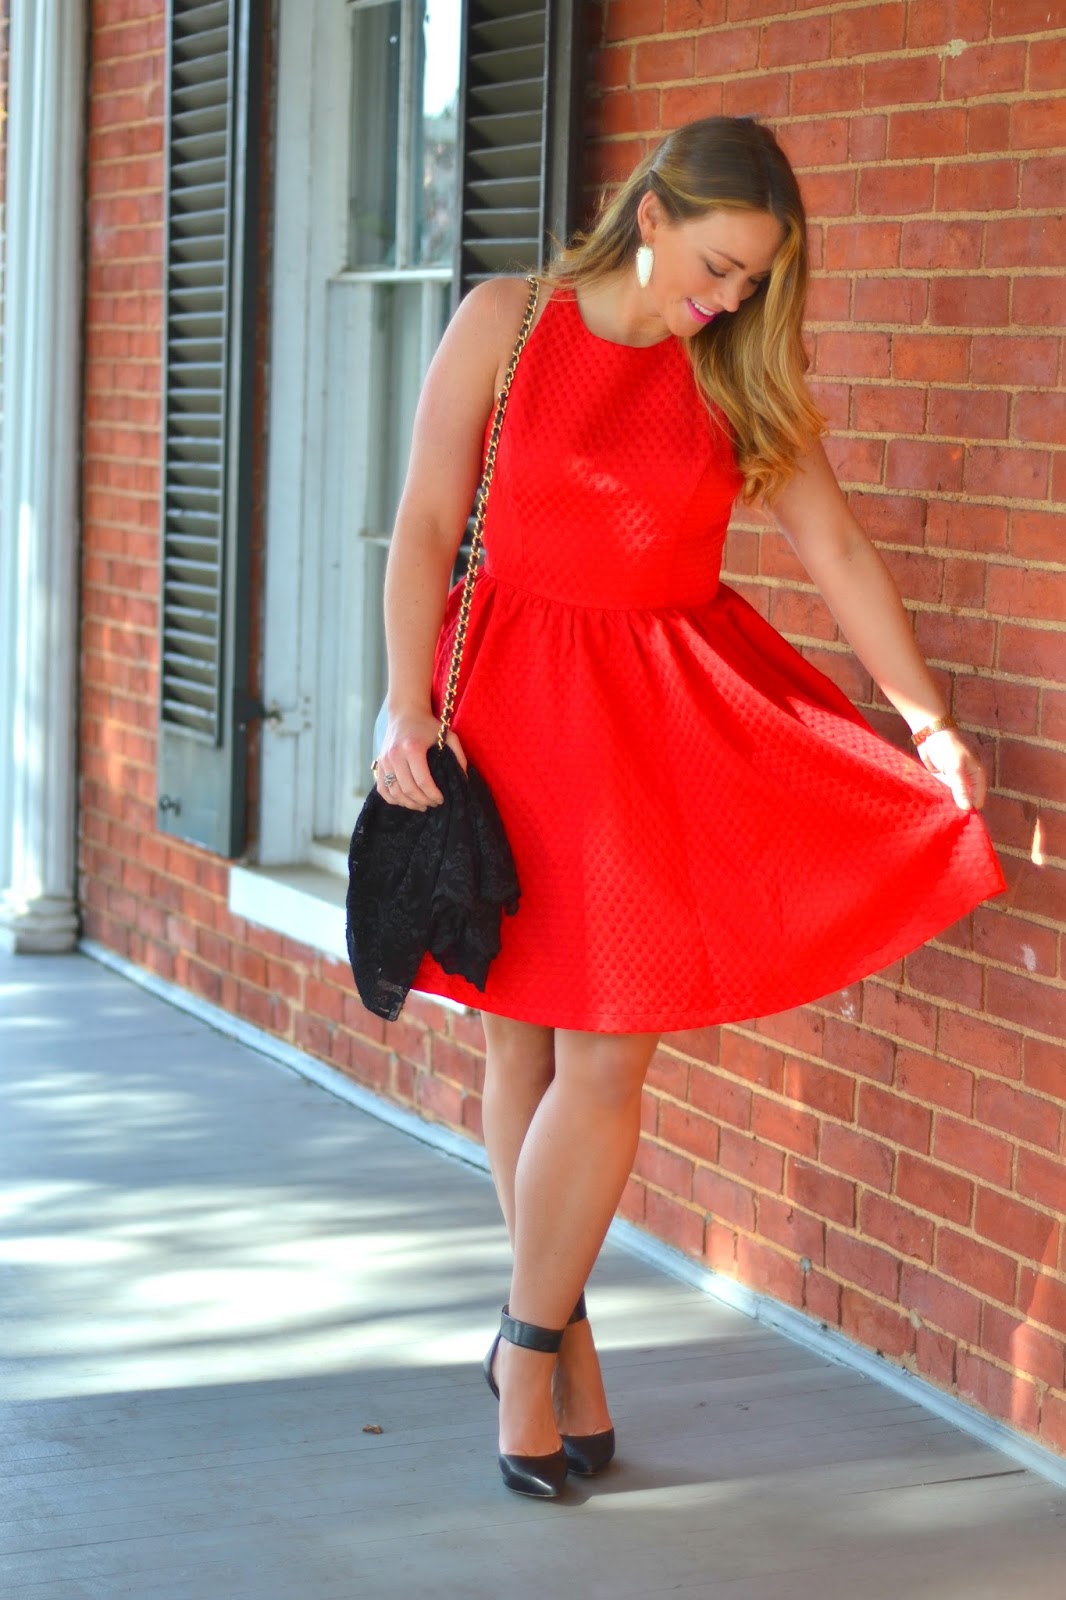 Red Dress is A Must Have for the Season